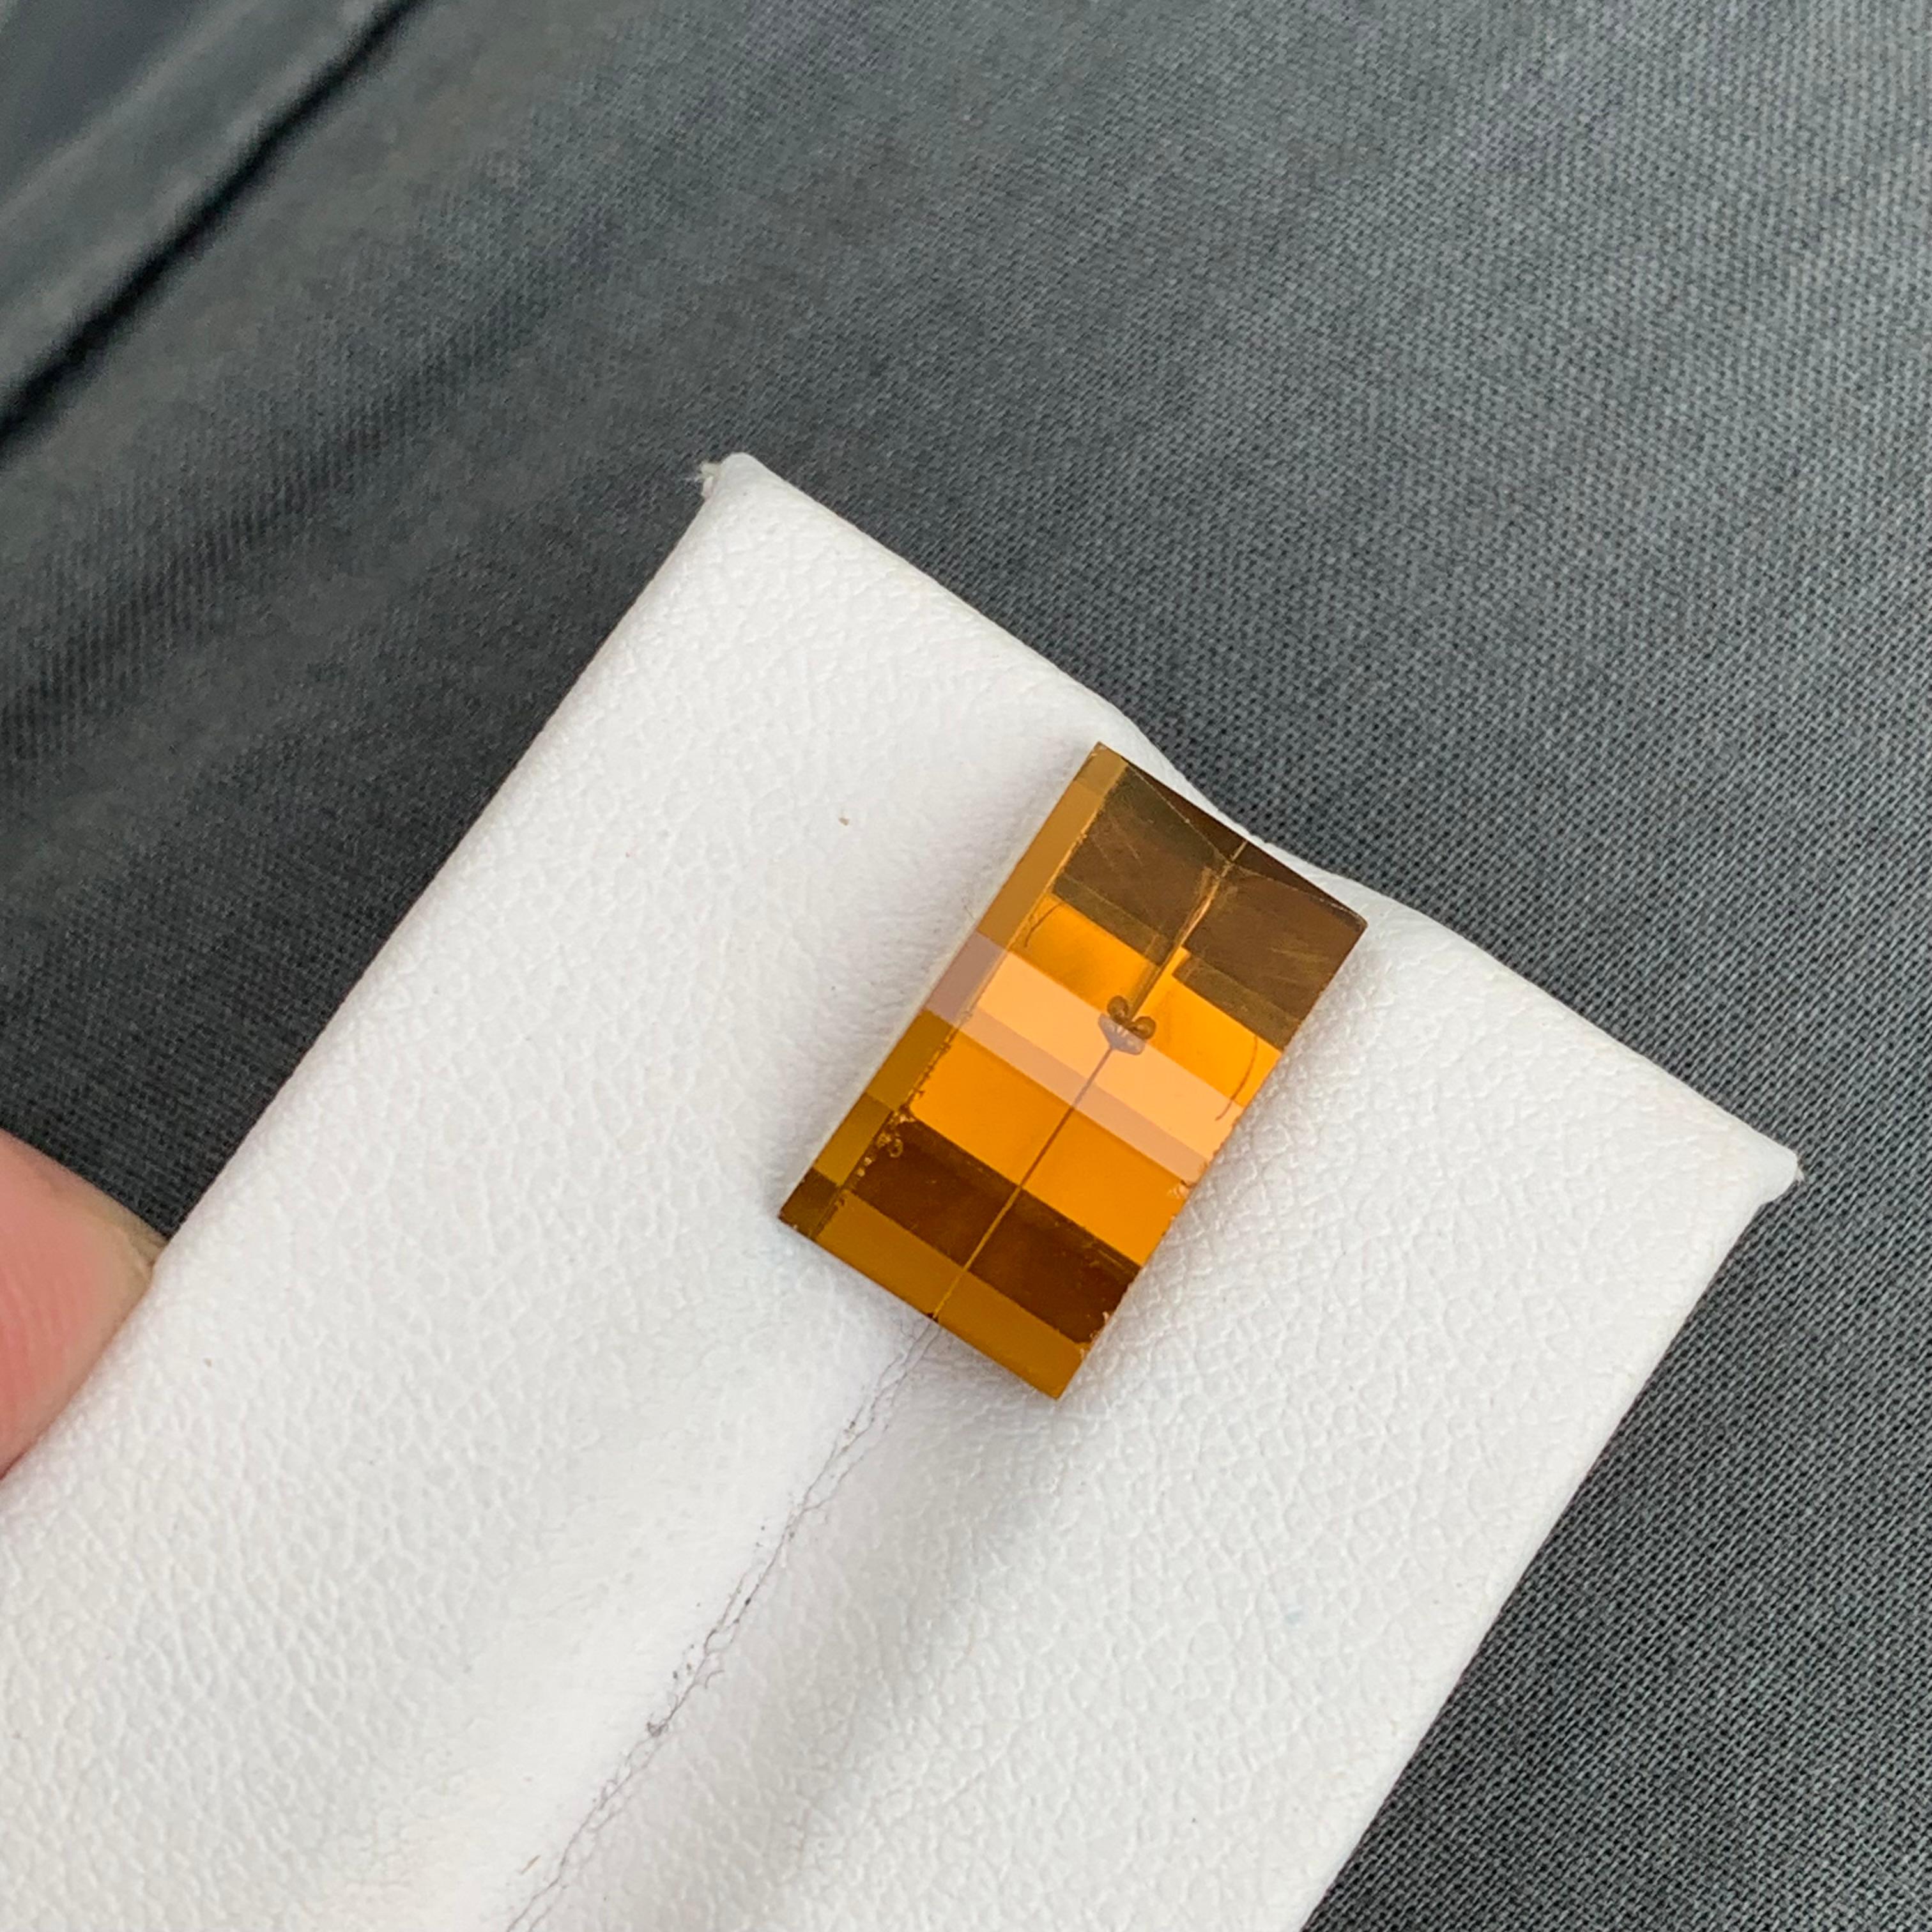 6.75 Carat Natural Loose Pixel Cut CItrine Gemstone From Brazil For Sale 4